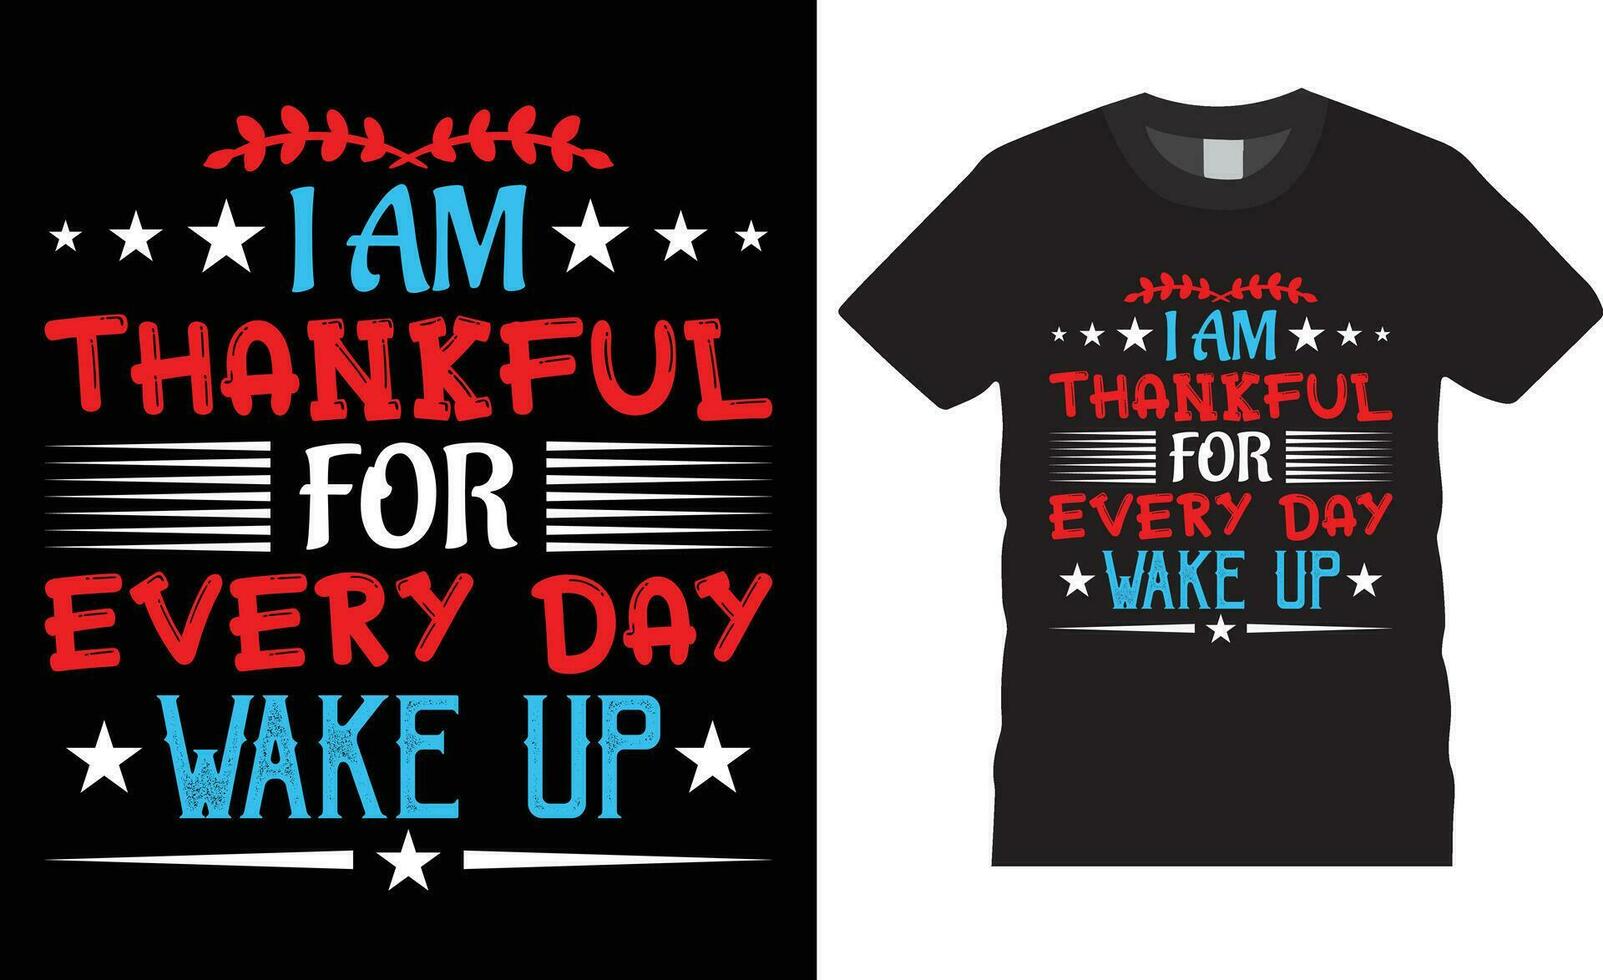 Trendy Thanksgiving Day t shirt Design and Thanksgiving typography t shirt design.I am thankful every day wake up vector